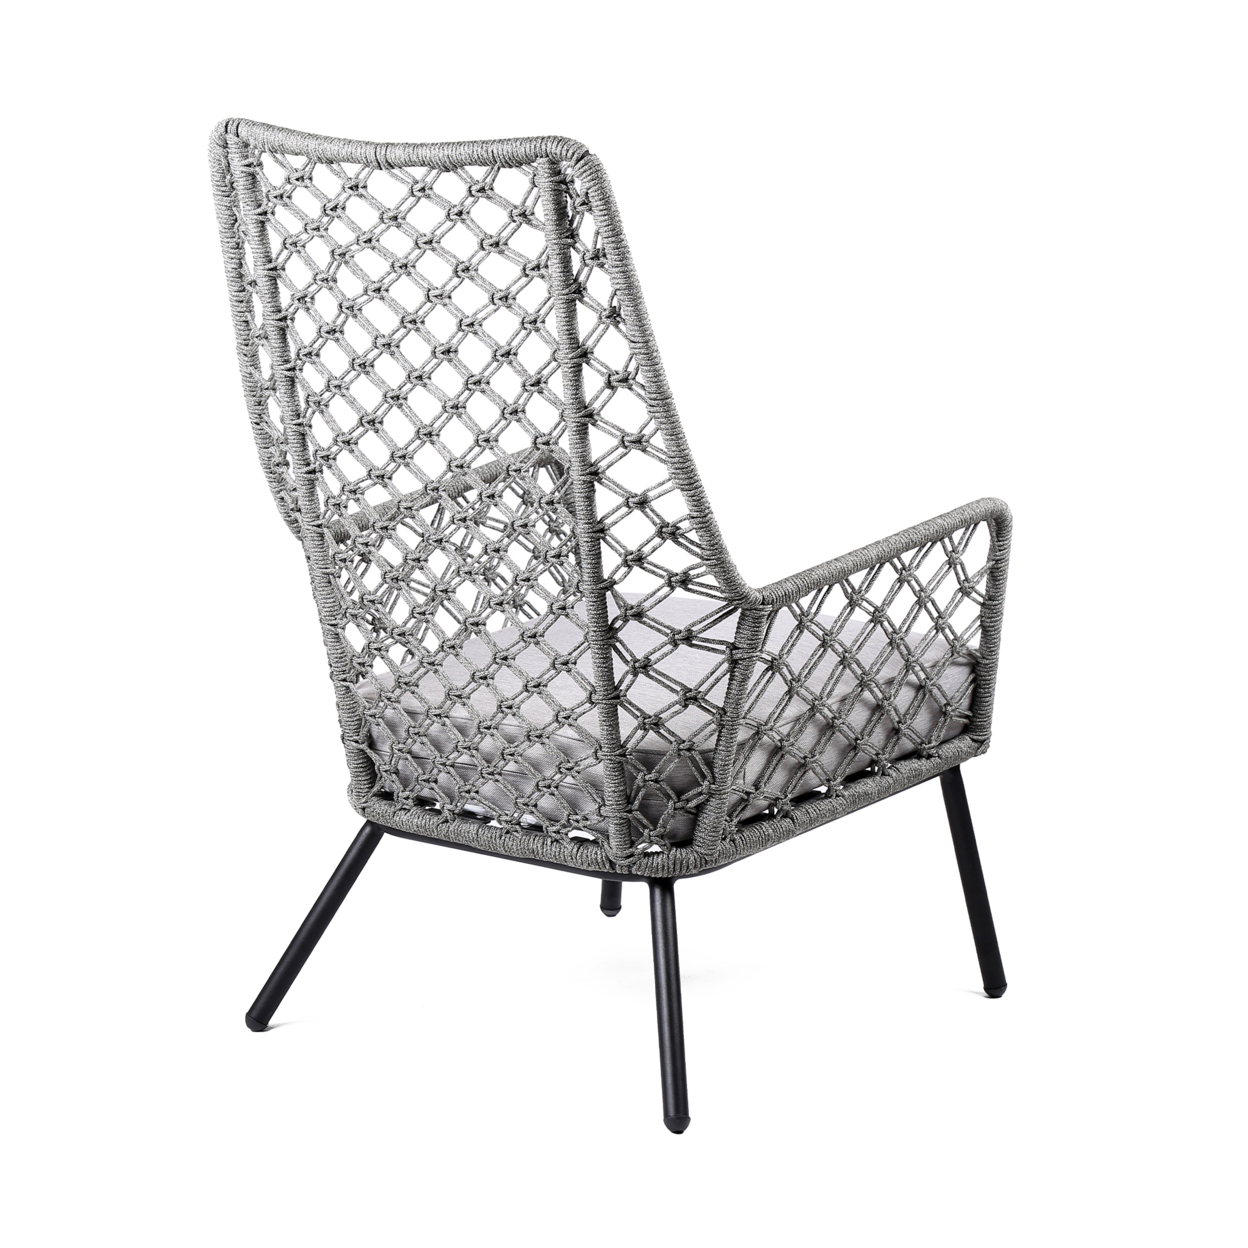 Indoor Outdoor Lounge Chair With Intricate Woven Lattice Back, Gray- Saltoro Sherpi